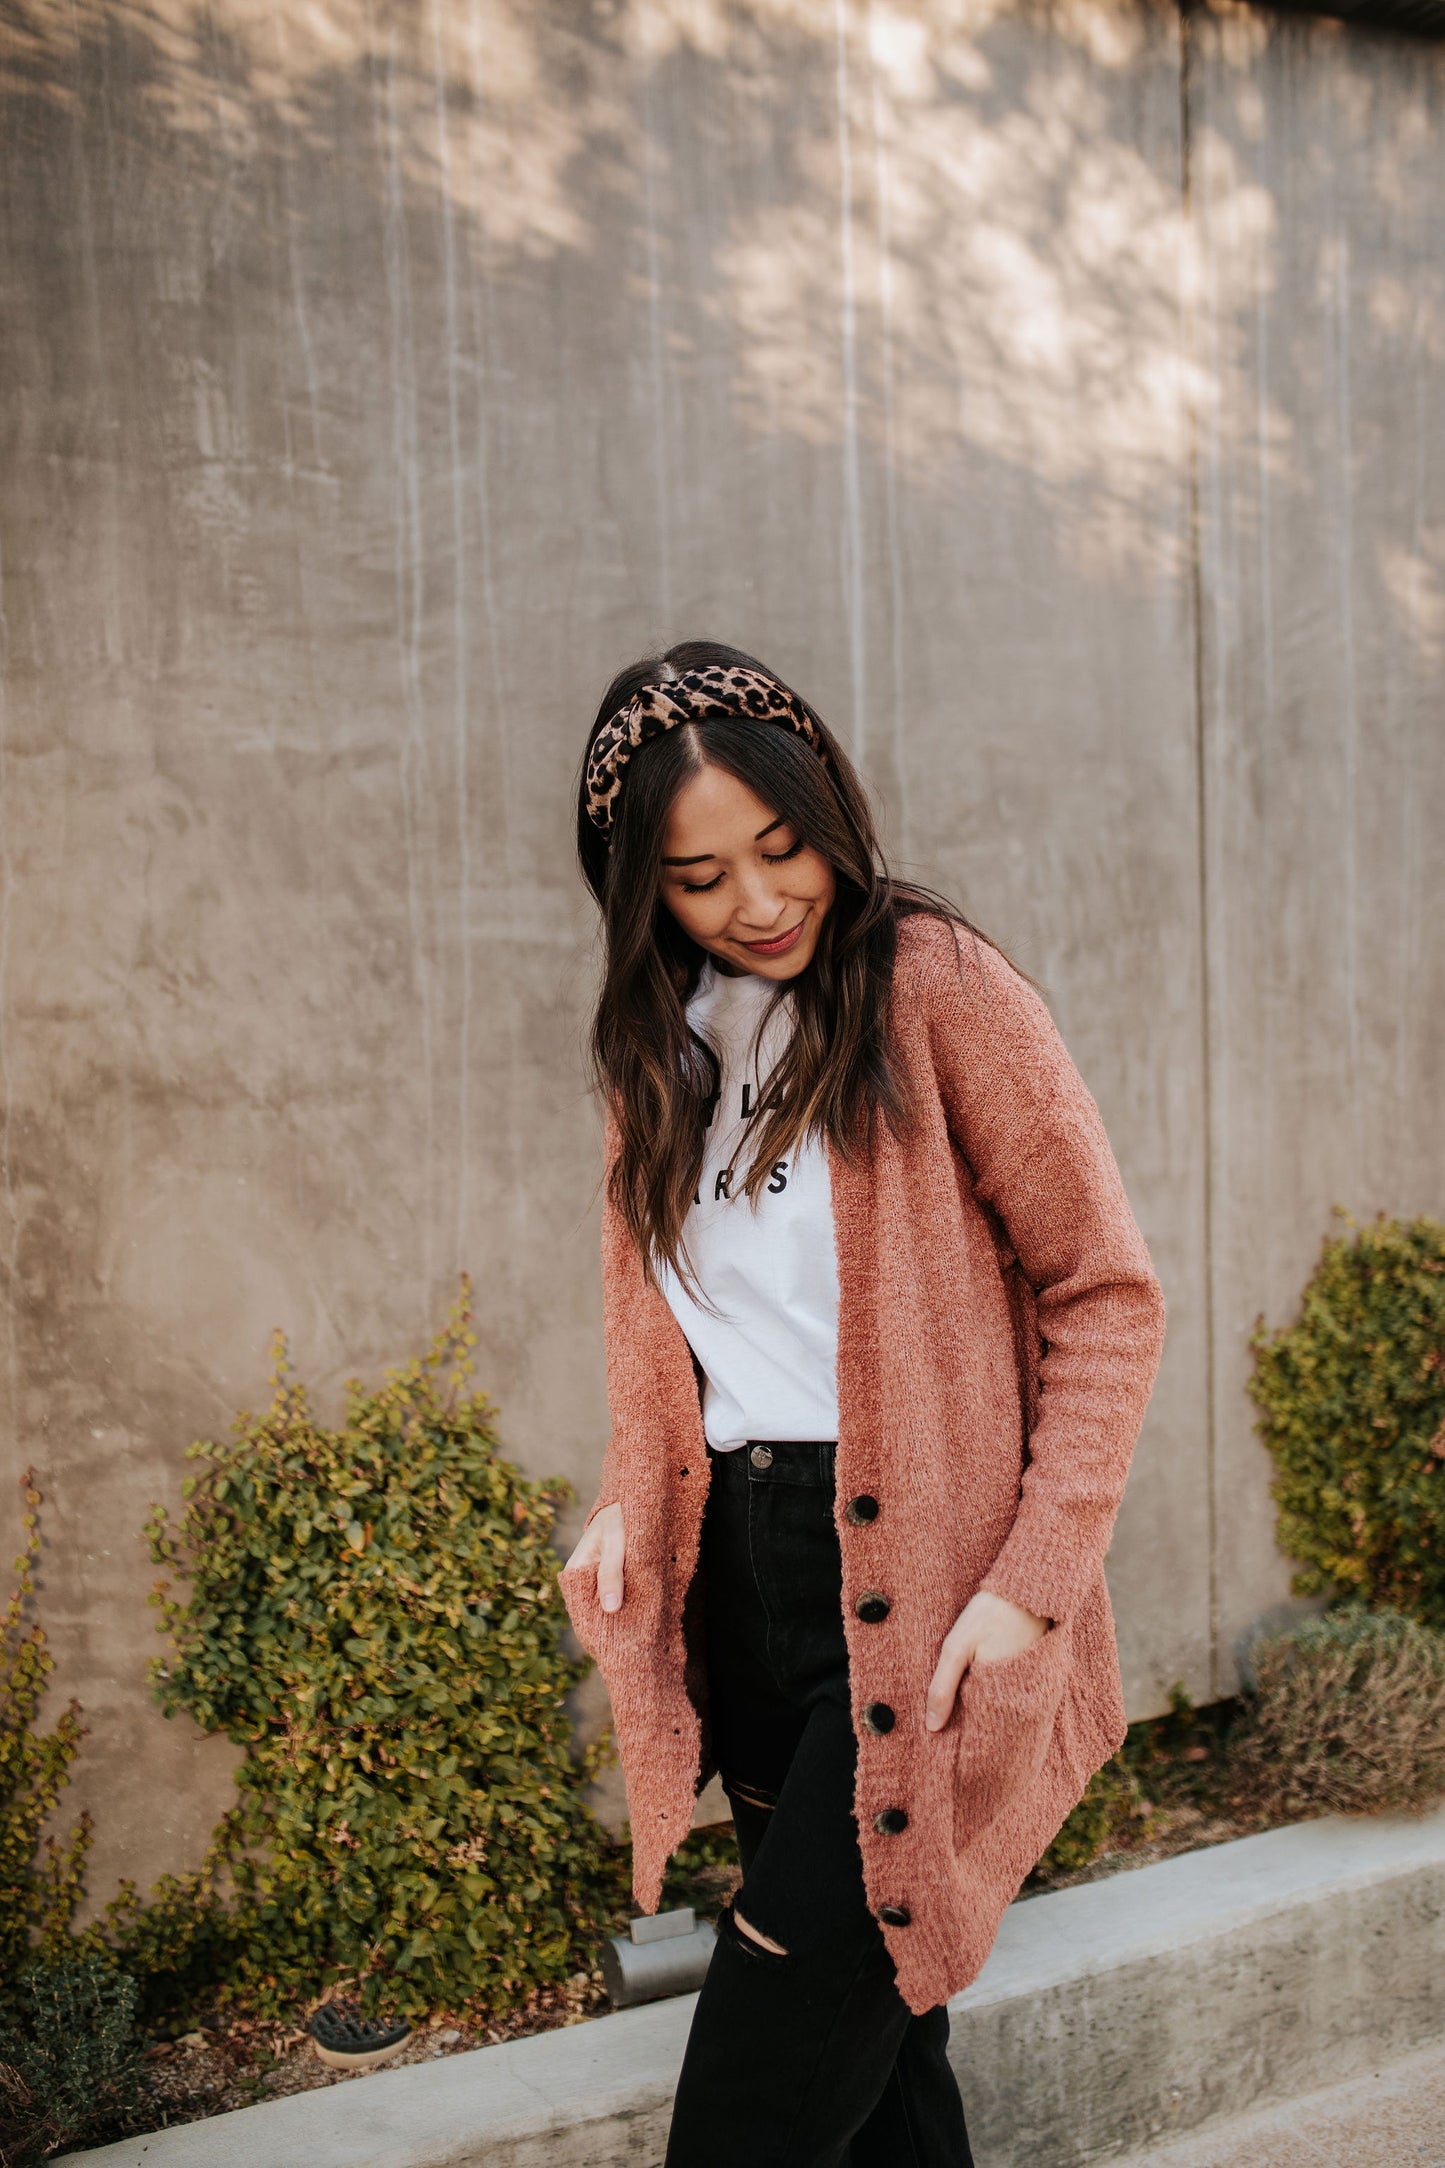 THE ADORE YOU CARDIGAN IN CLAY